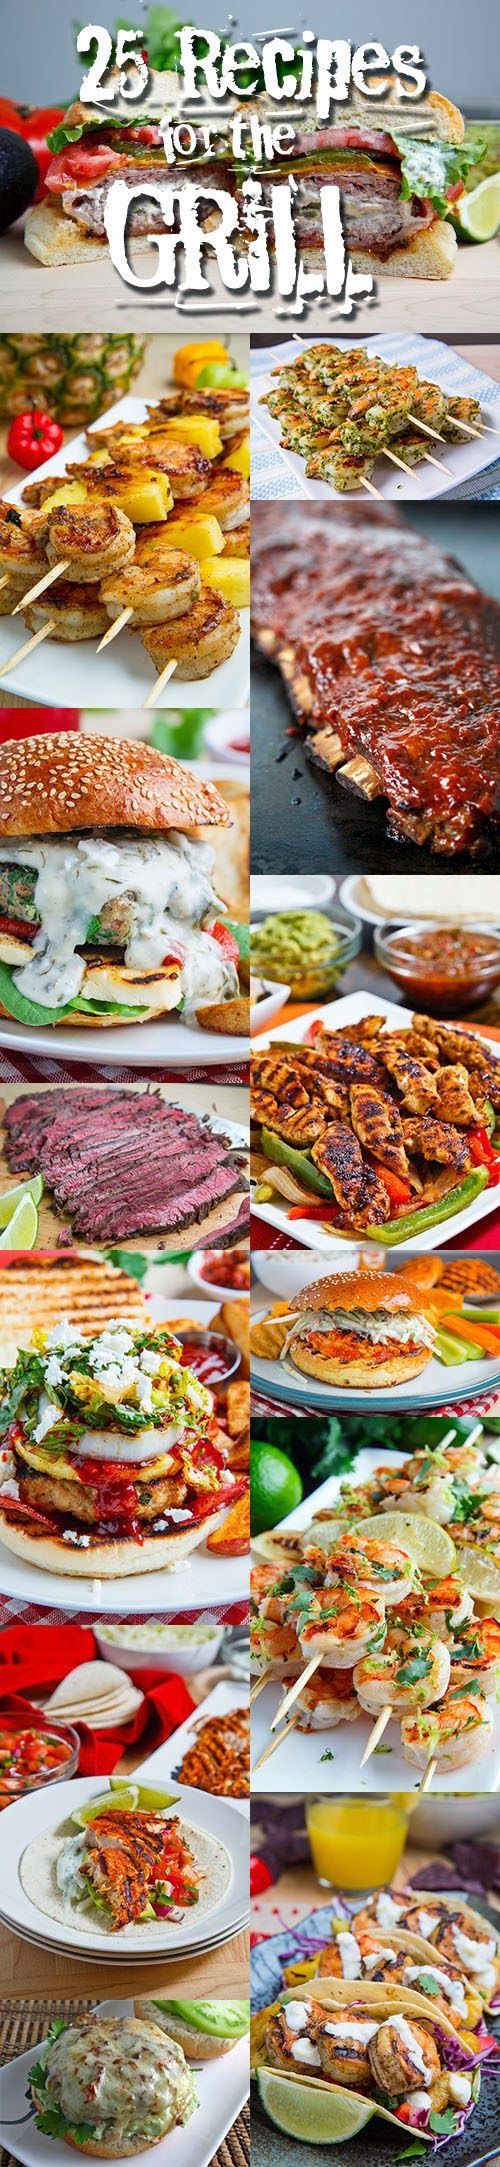 25 Recipes for the Grill – Can’t wait to grill